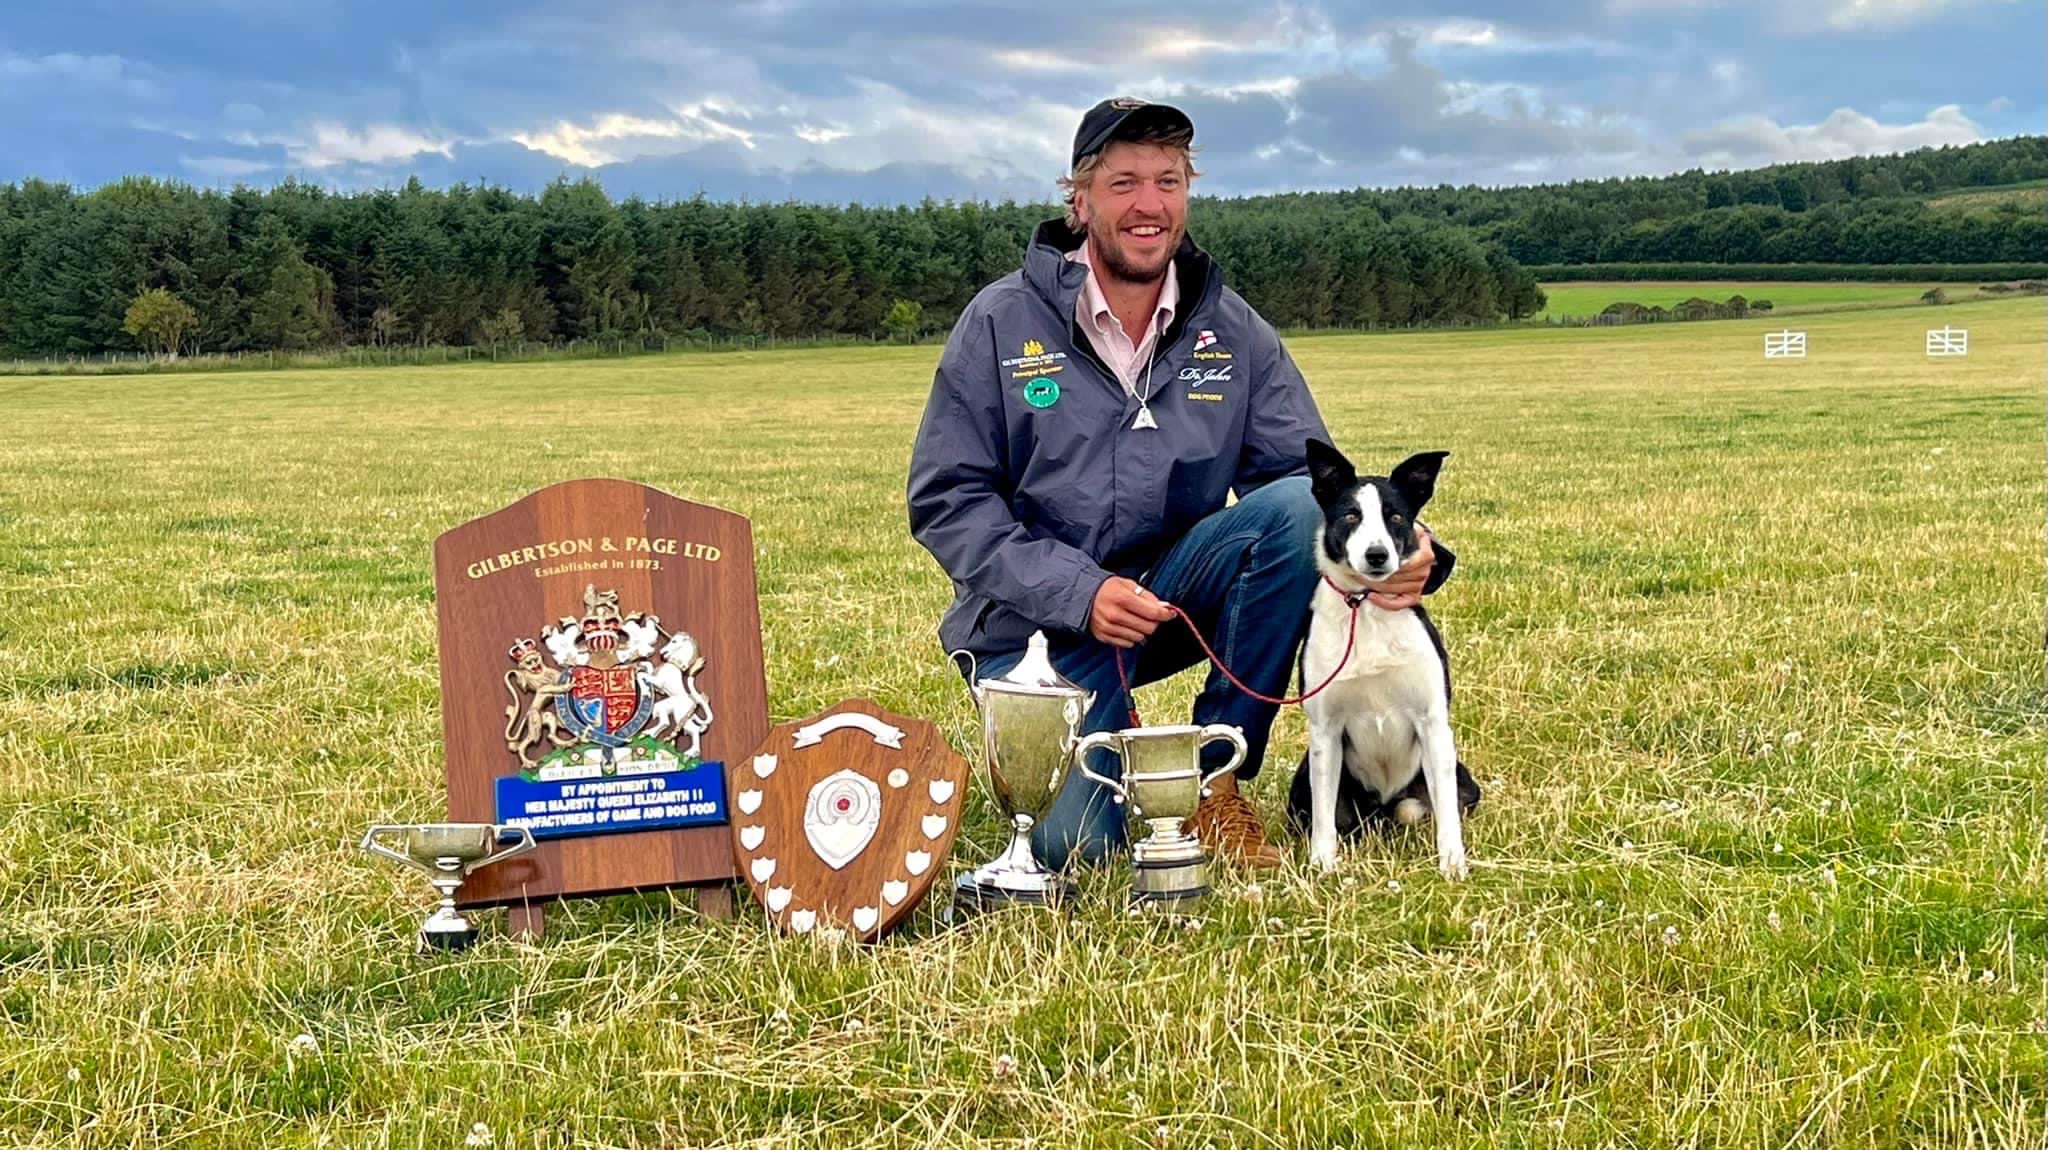 Frank with Lola the border collie and trophies